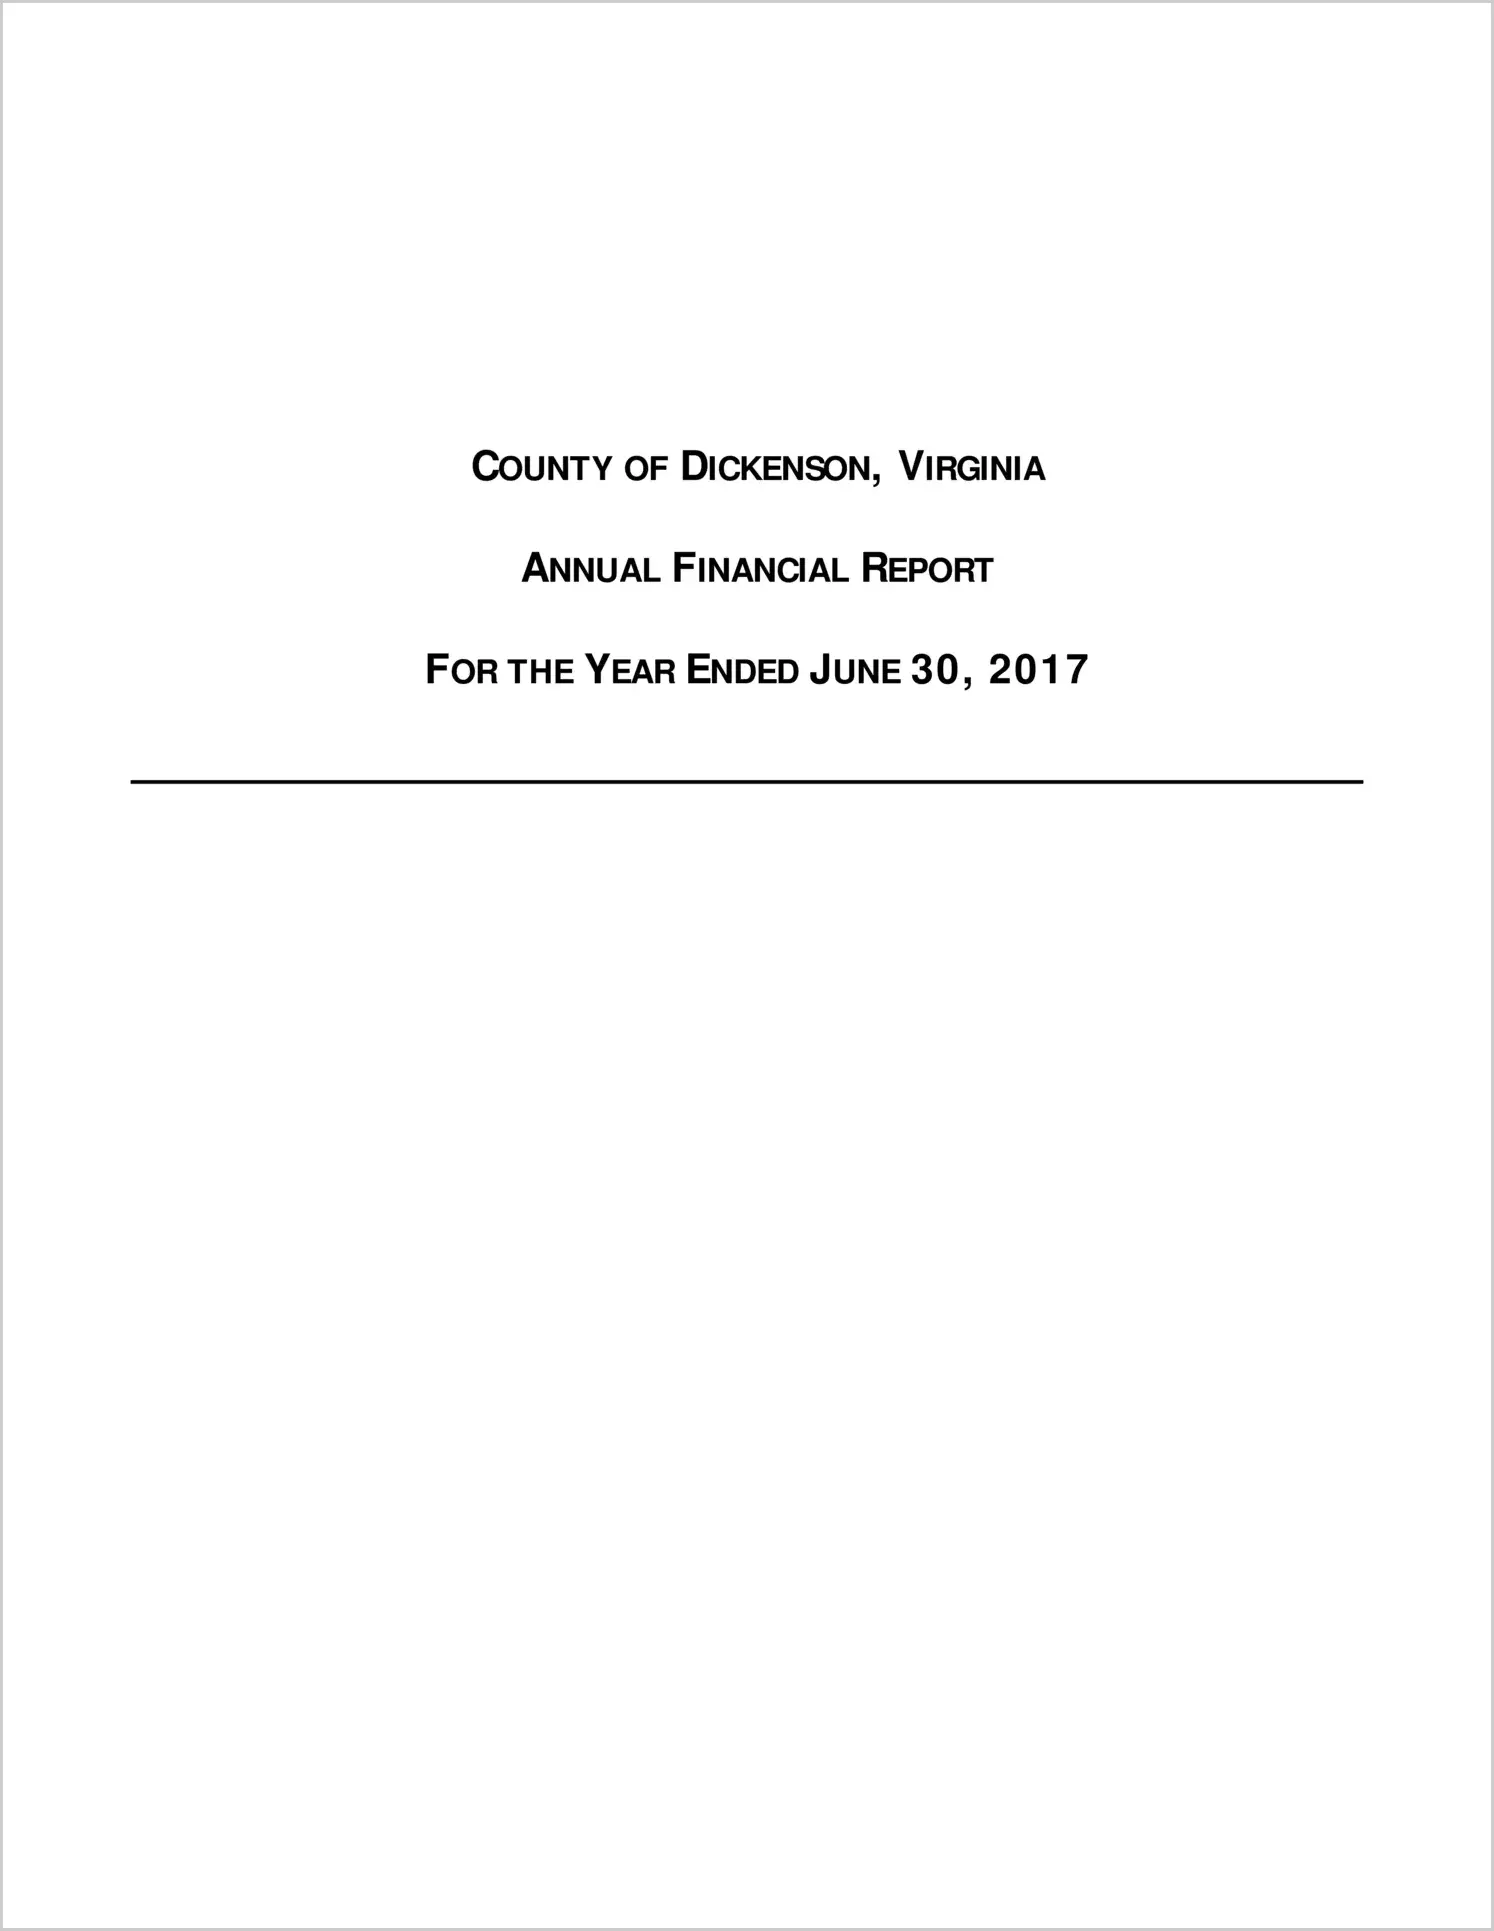 2017 Annual Financial Report for County of Dickenson